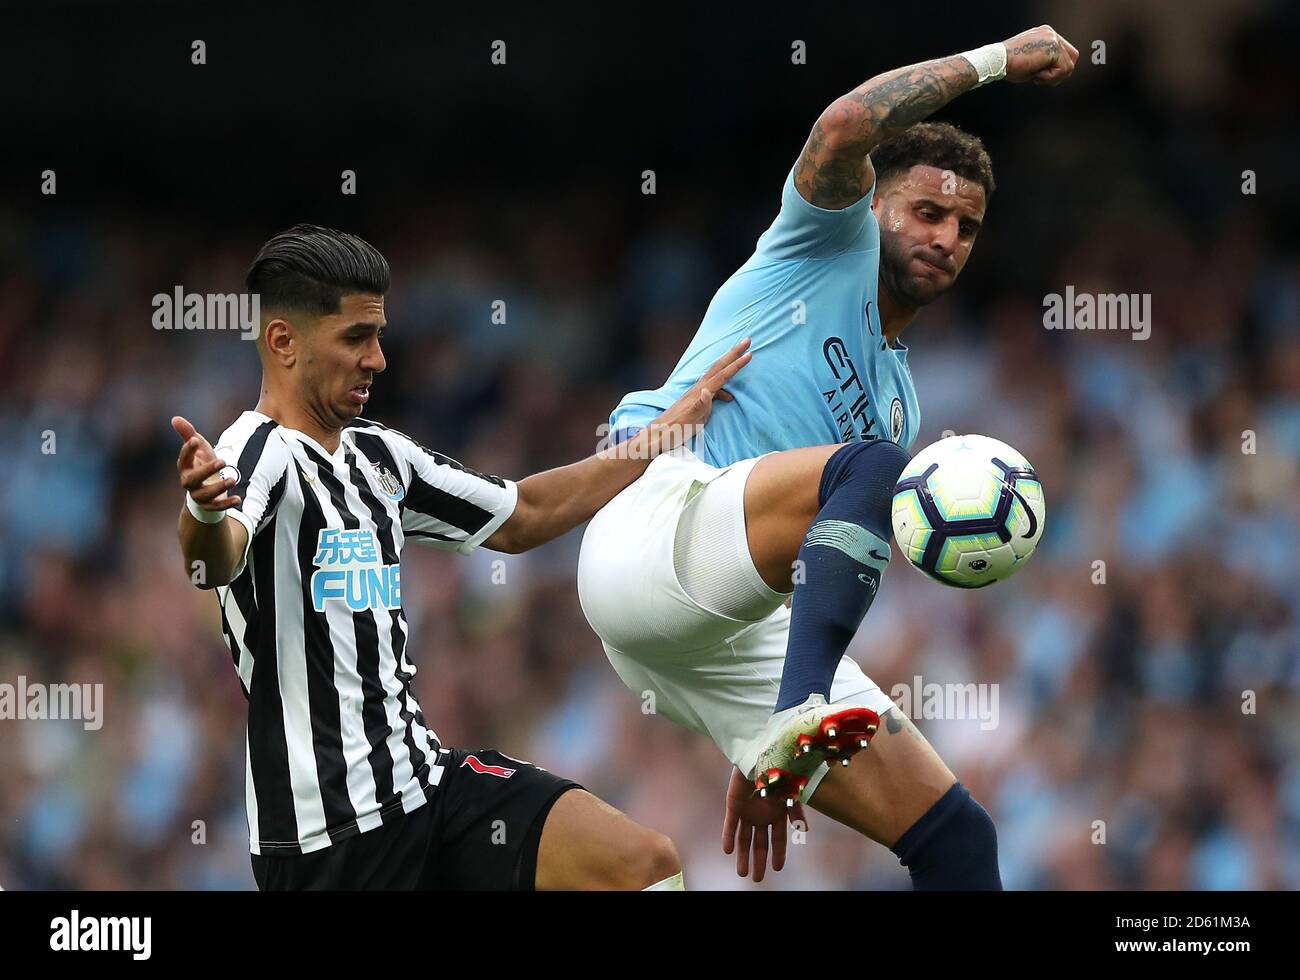 Manchester City's Kyle Walker (right) and Newcastle United's Ayoze Perez battle for the ball Stock Photo